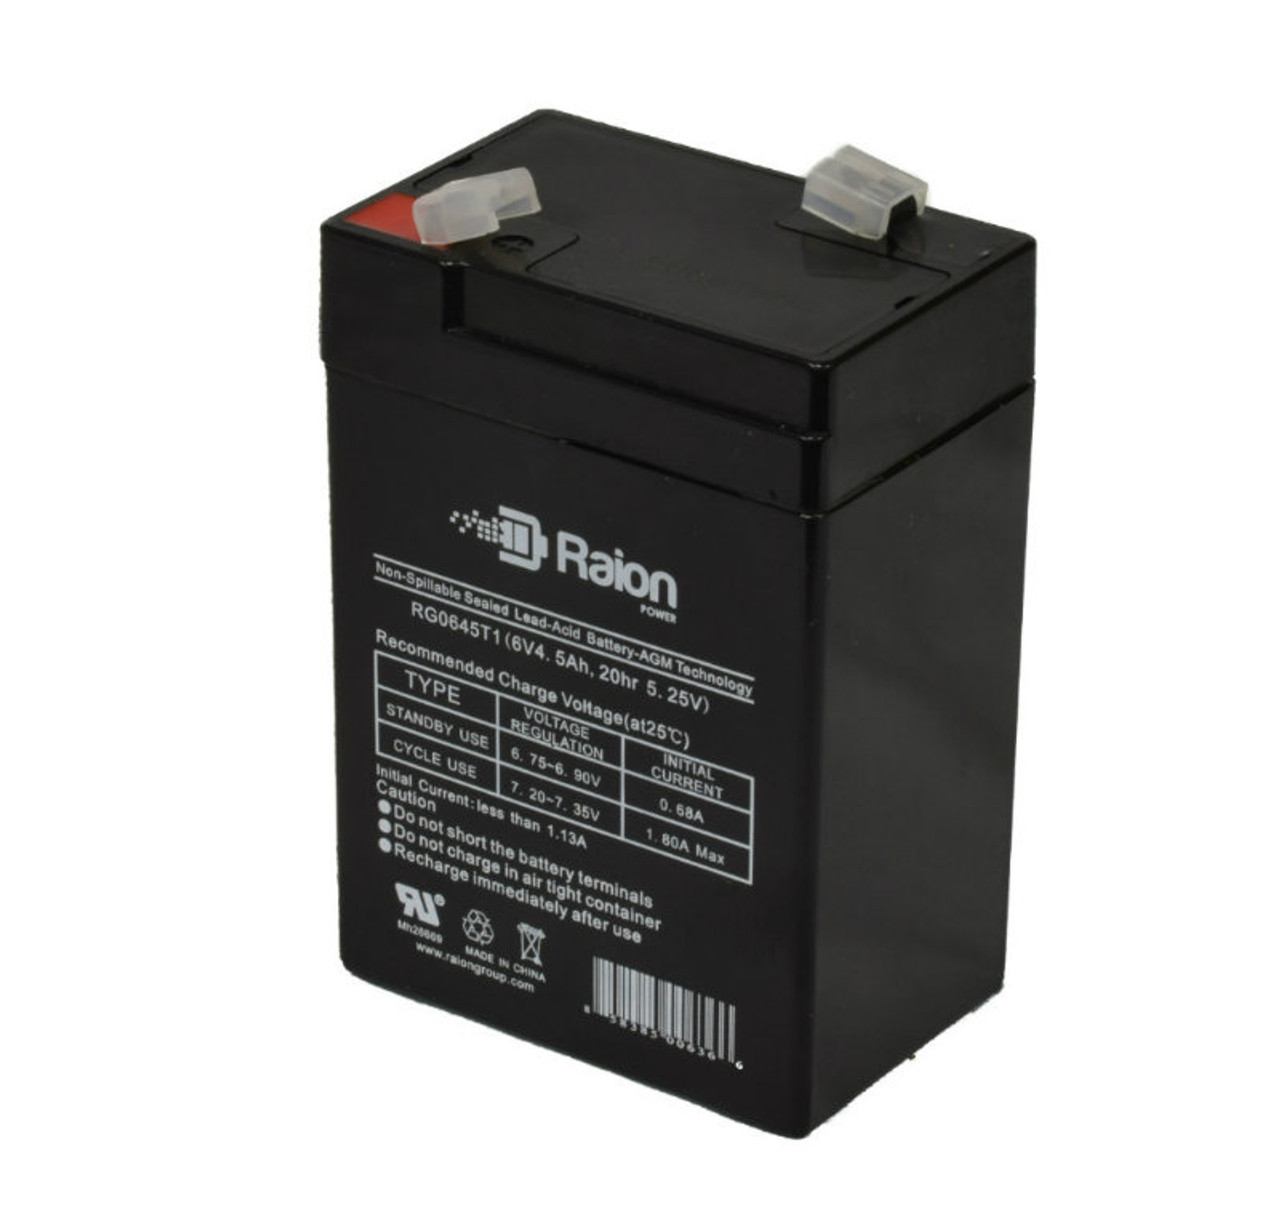 Raion Power RG0645T1 6V 4.5Ah Replacement Battery Cartridge for Tempest TR6-6